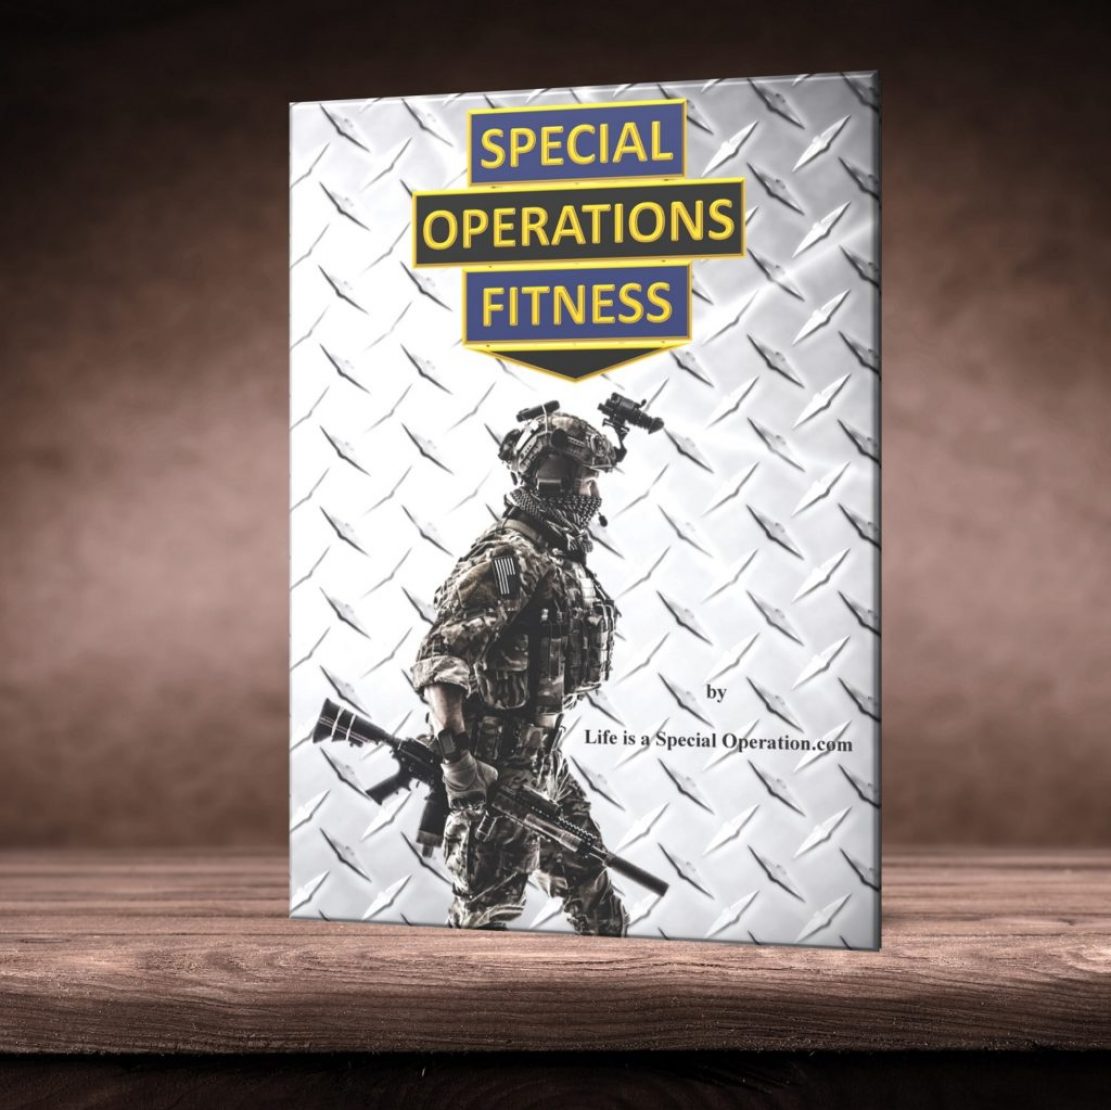 "Special Operations Fitness"